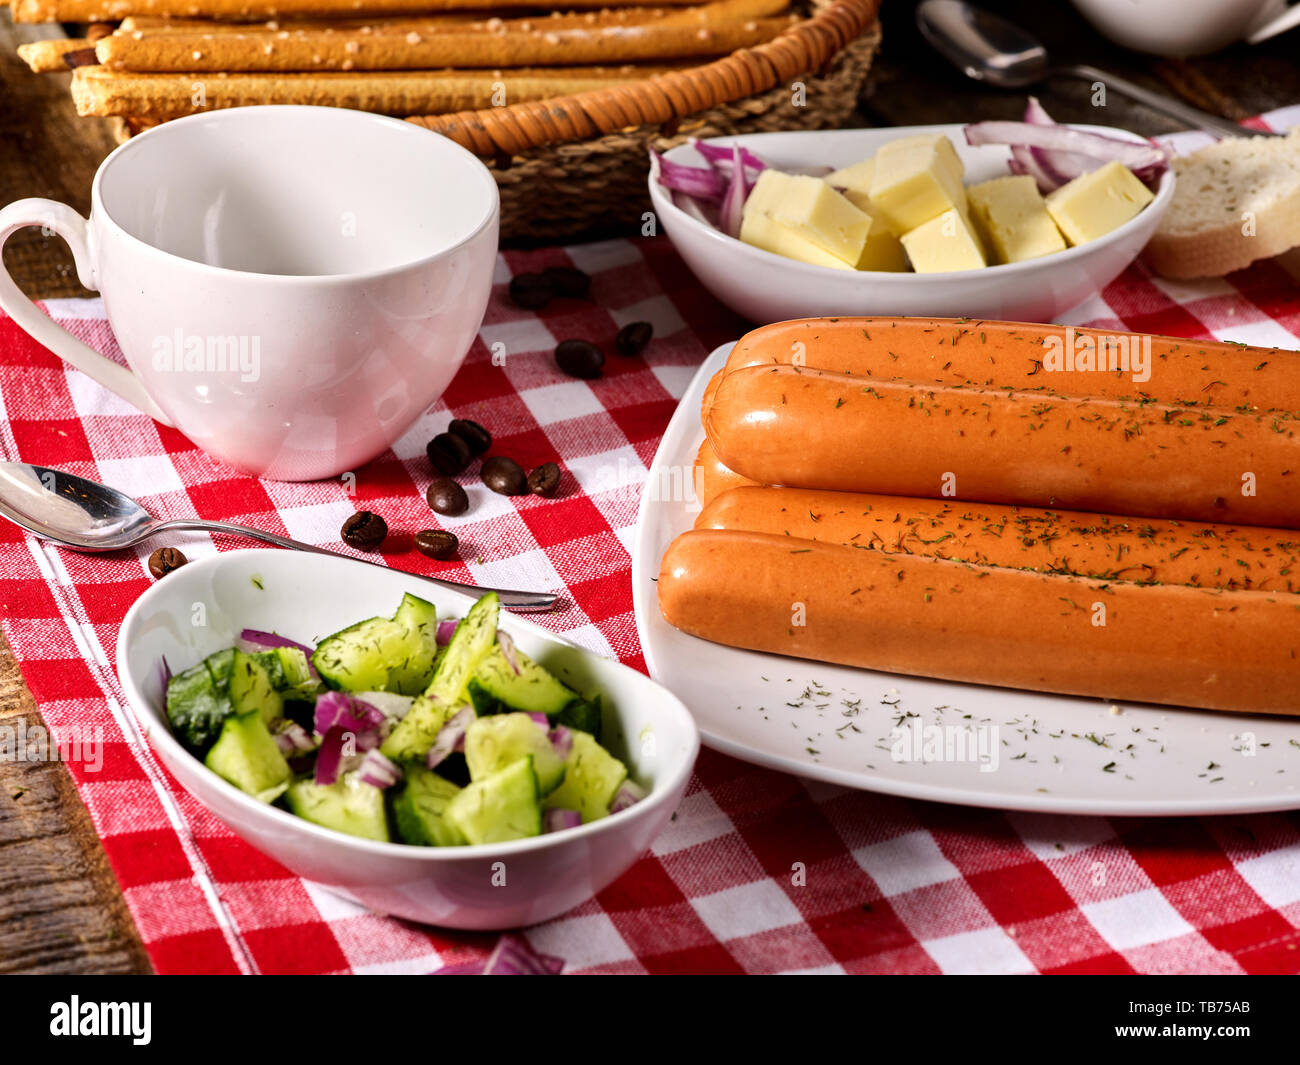 Sausage portion with baguette on table setting on checkered cloth Stock Photo